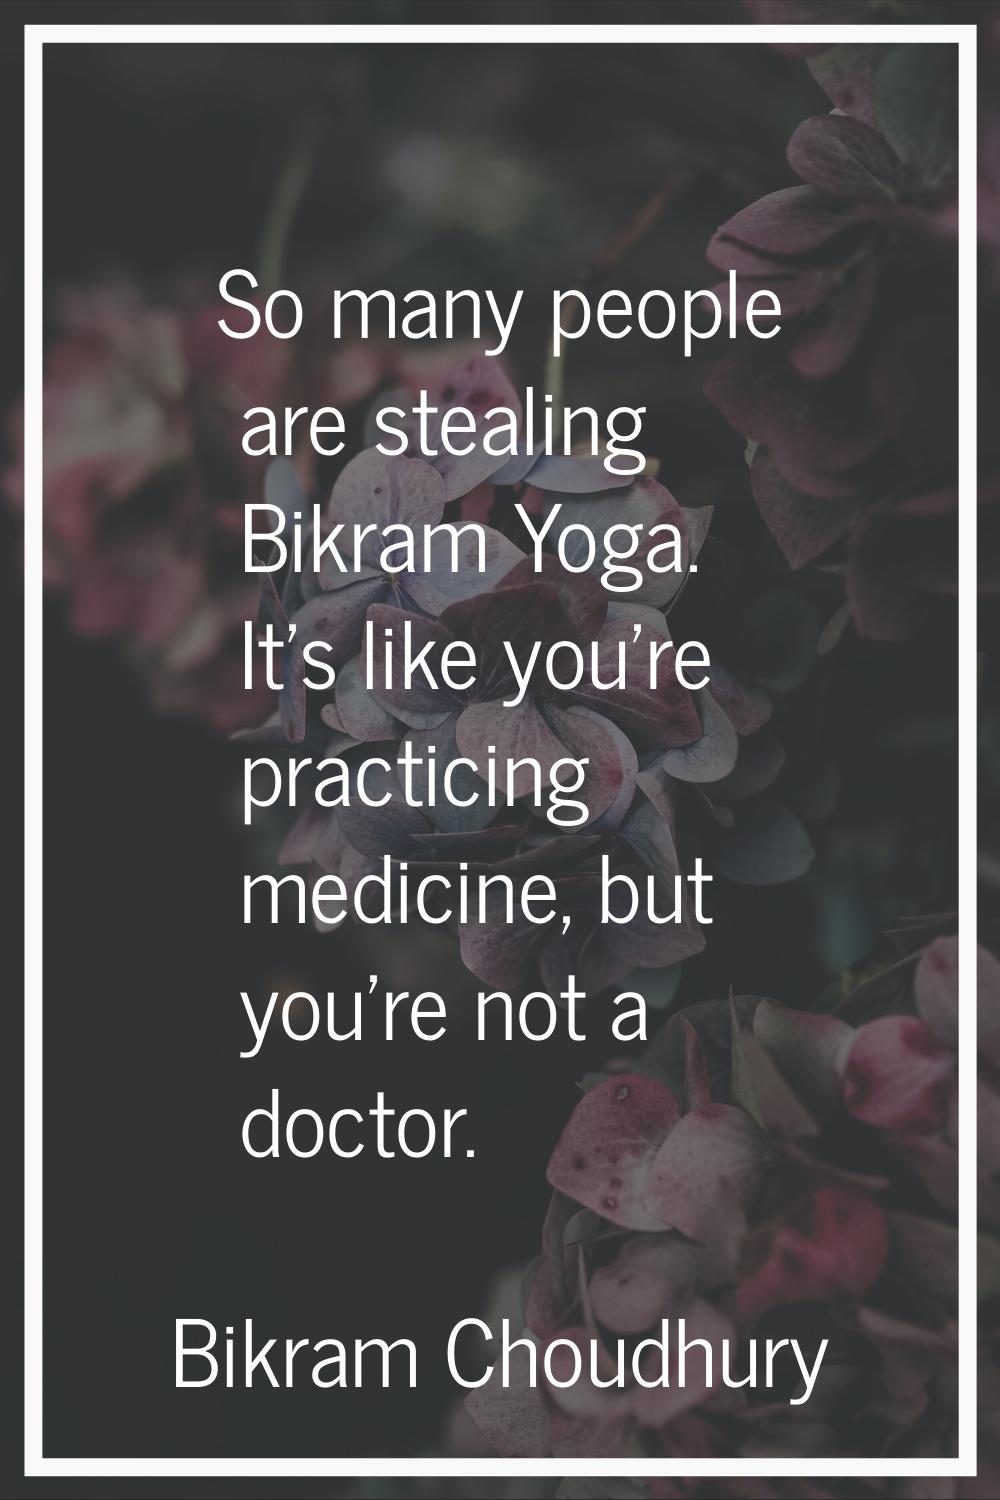 So many people are stealing Bikram Yoga. It's like you're practicing medicine, but you're not a doc